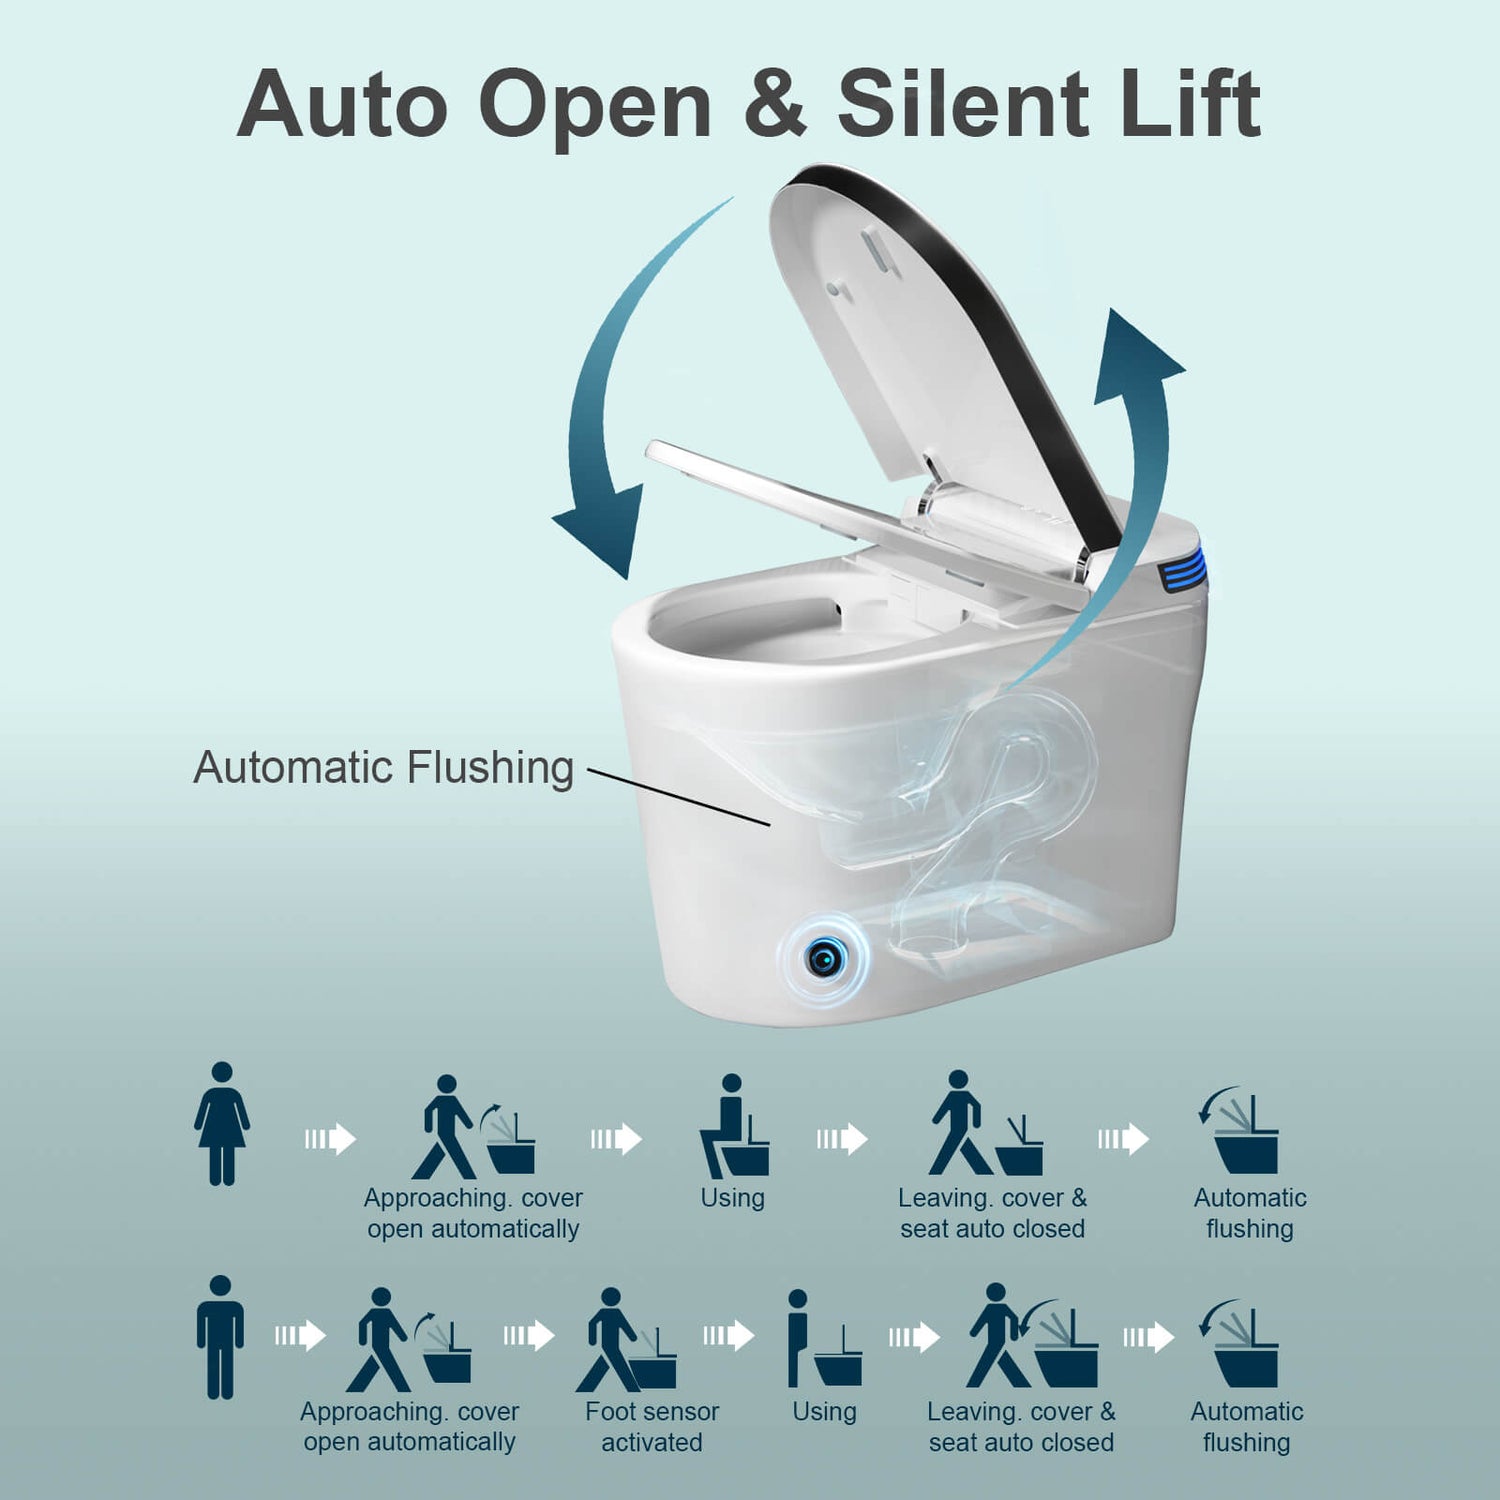 Modern Smart Bidet Toilet with LED Light, Heated Seat, Automatic Flush Tankless